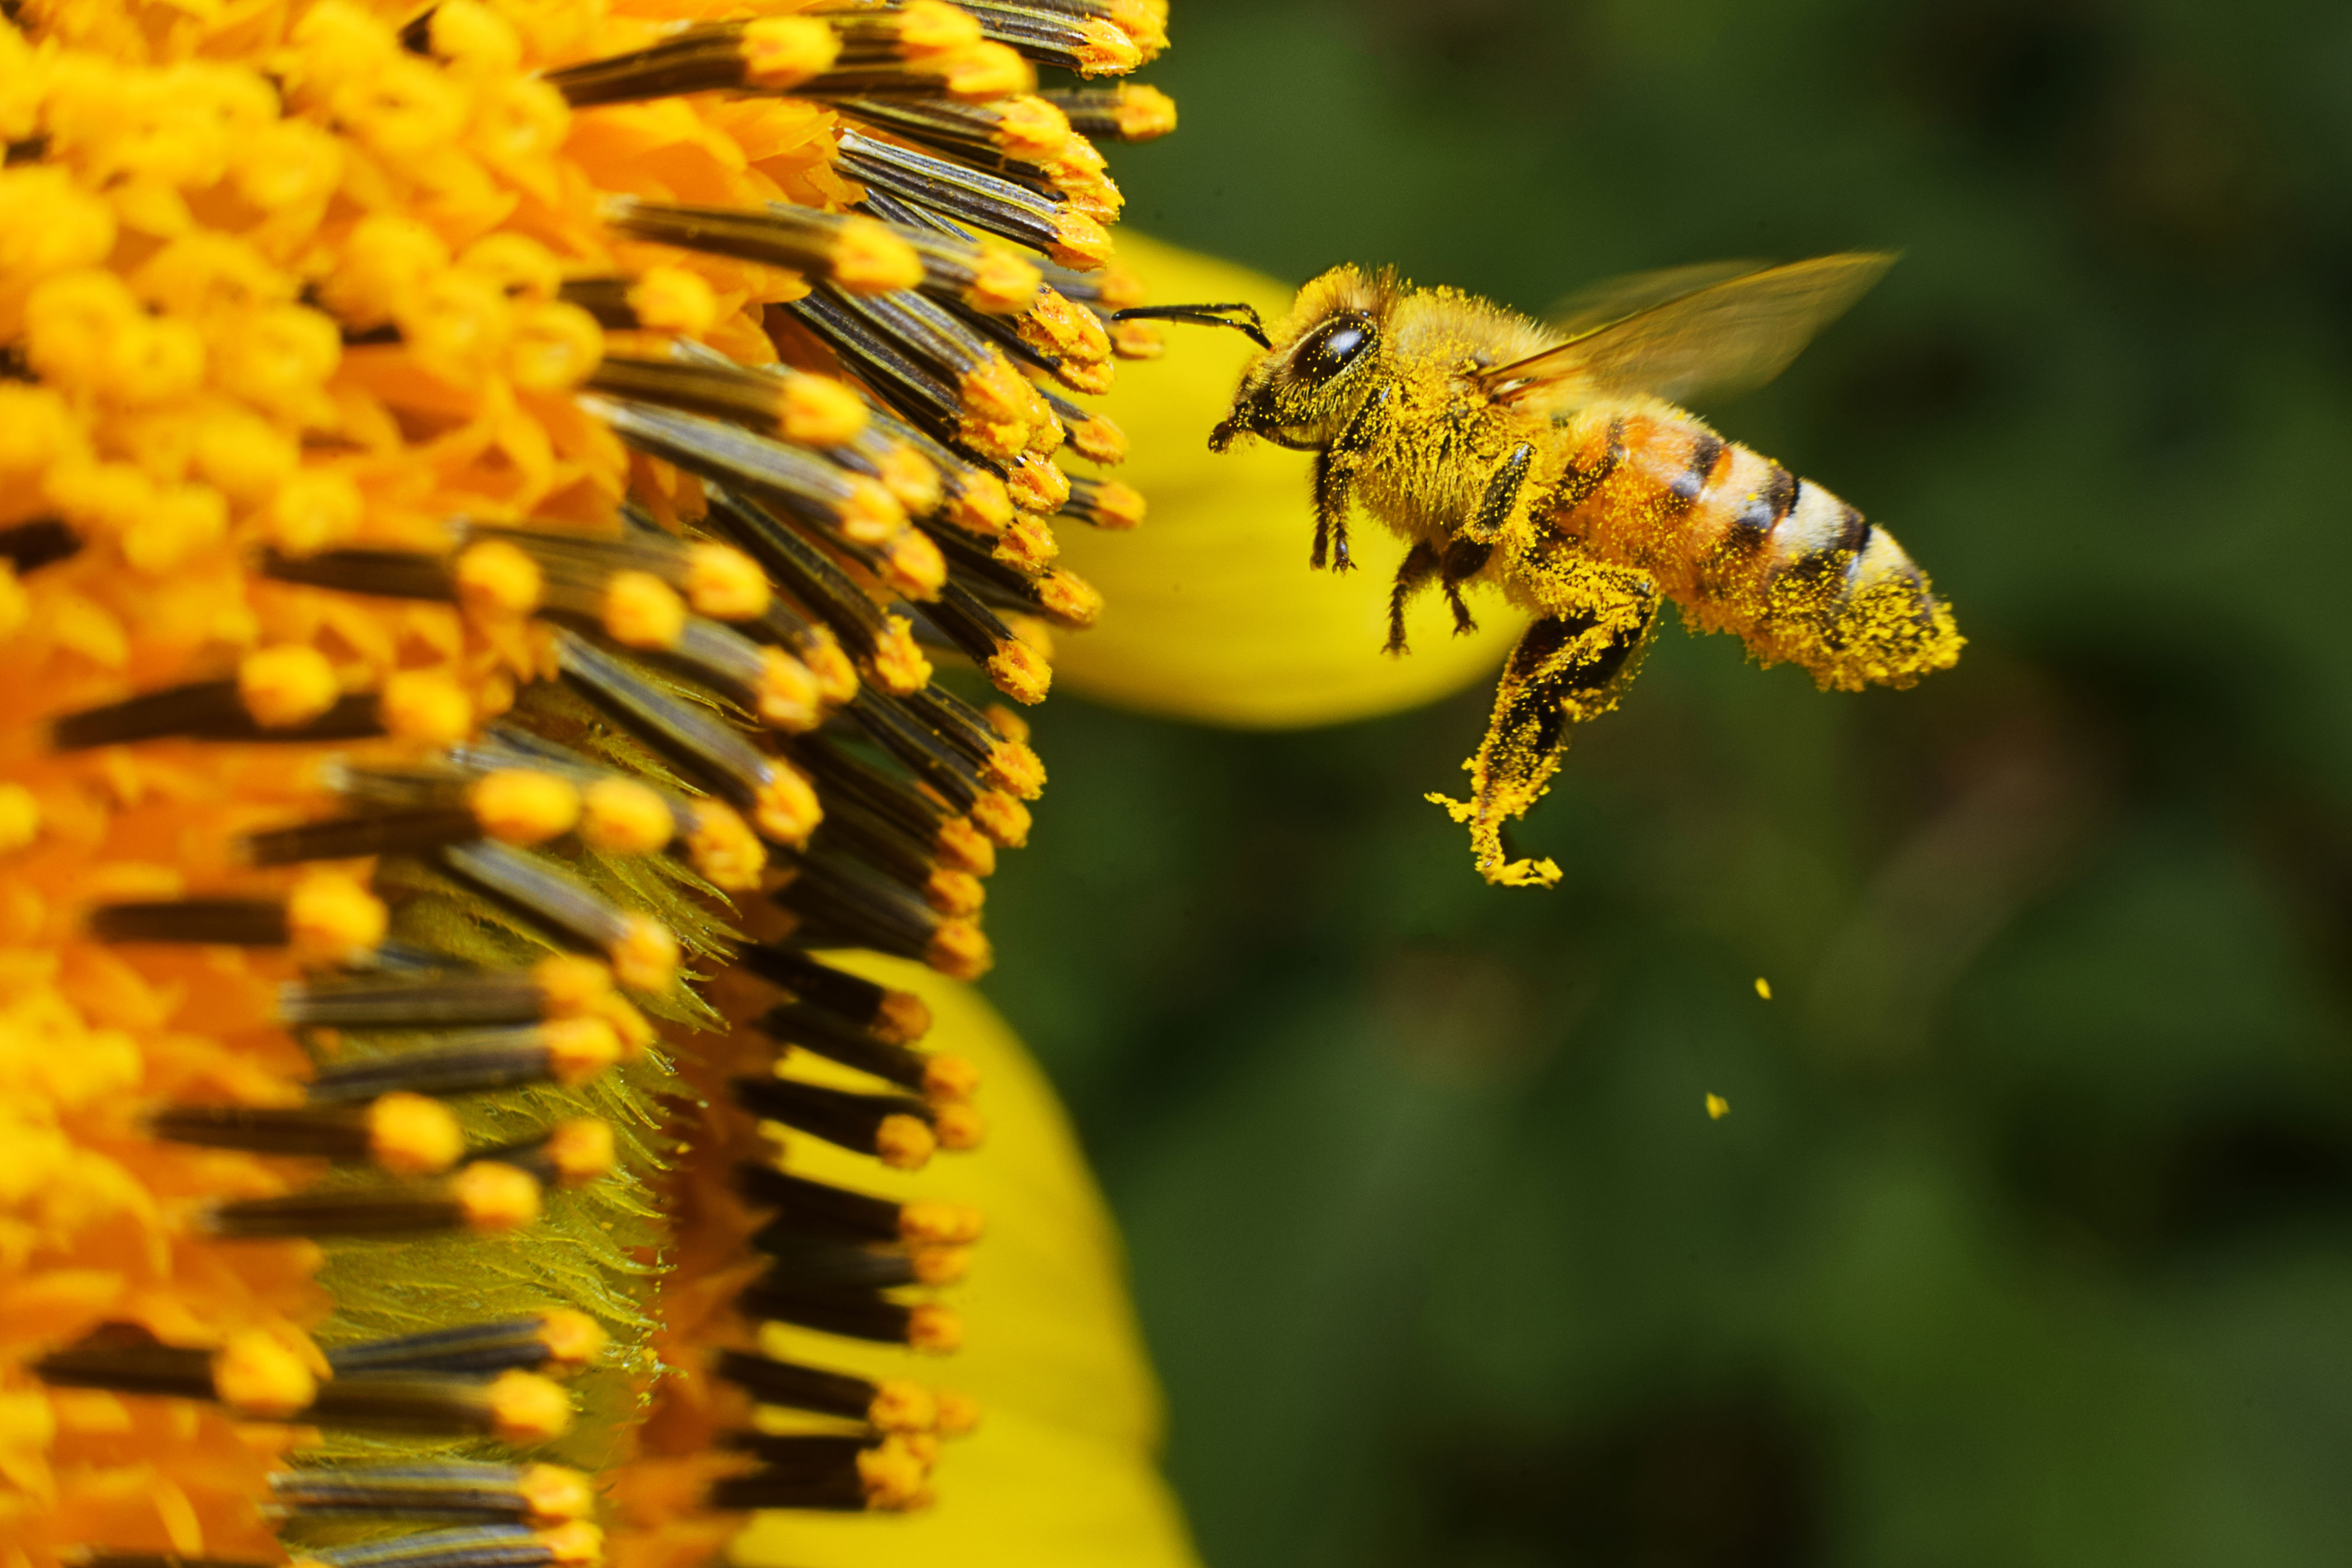 your yard can help avert the insect apocalypse. here’s how.